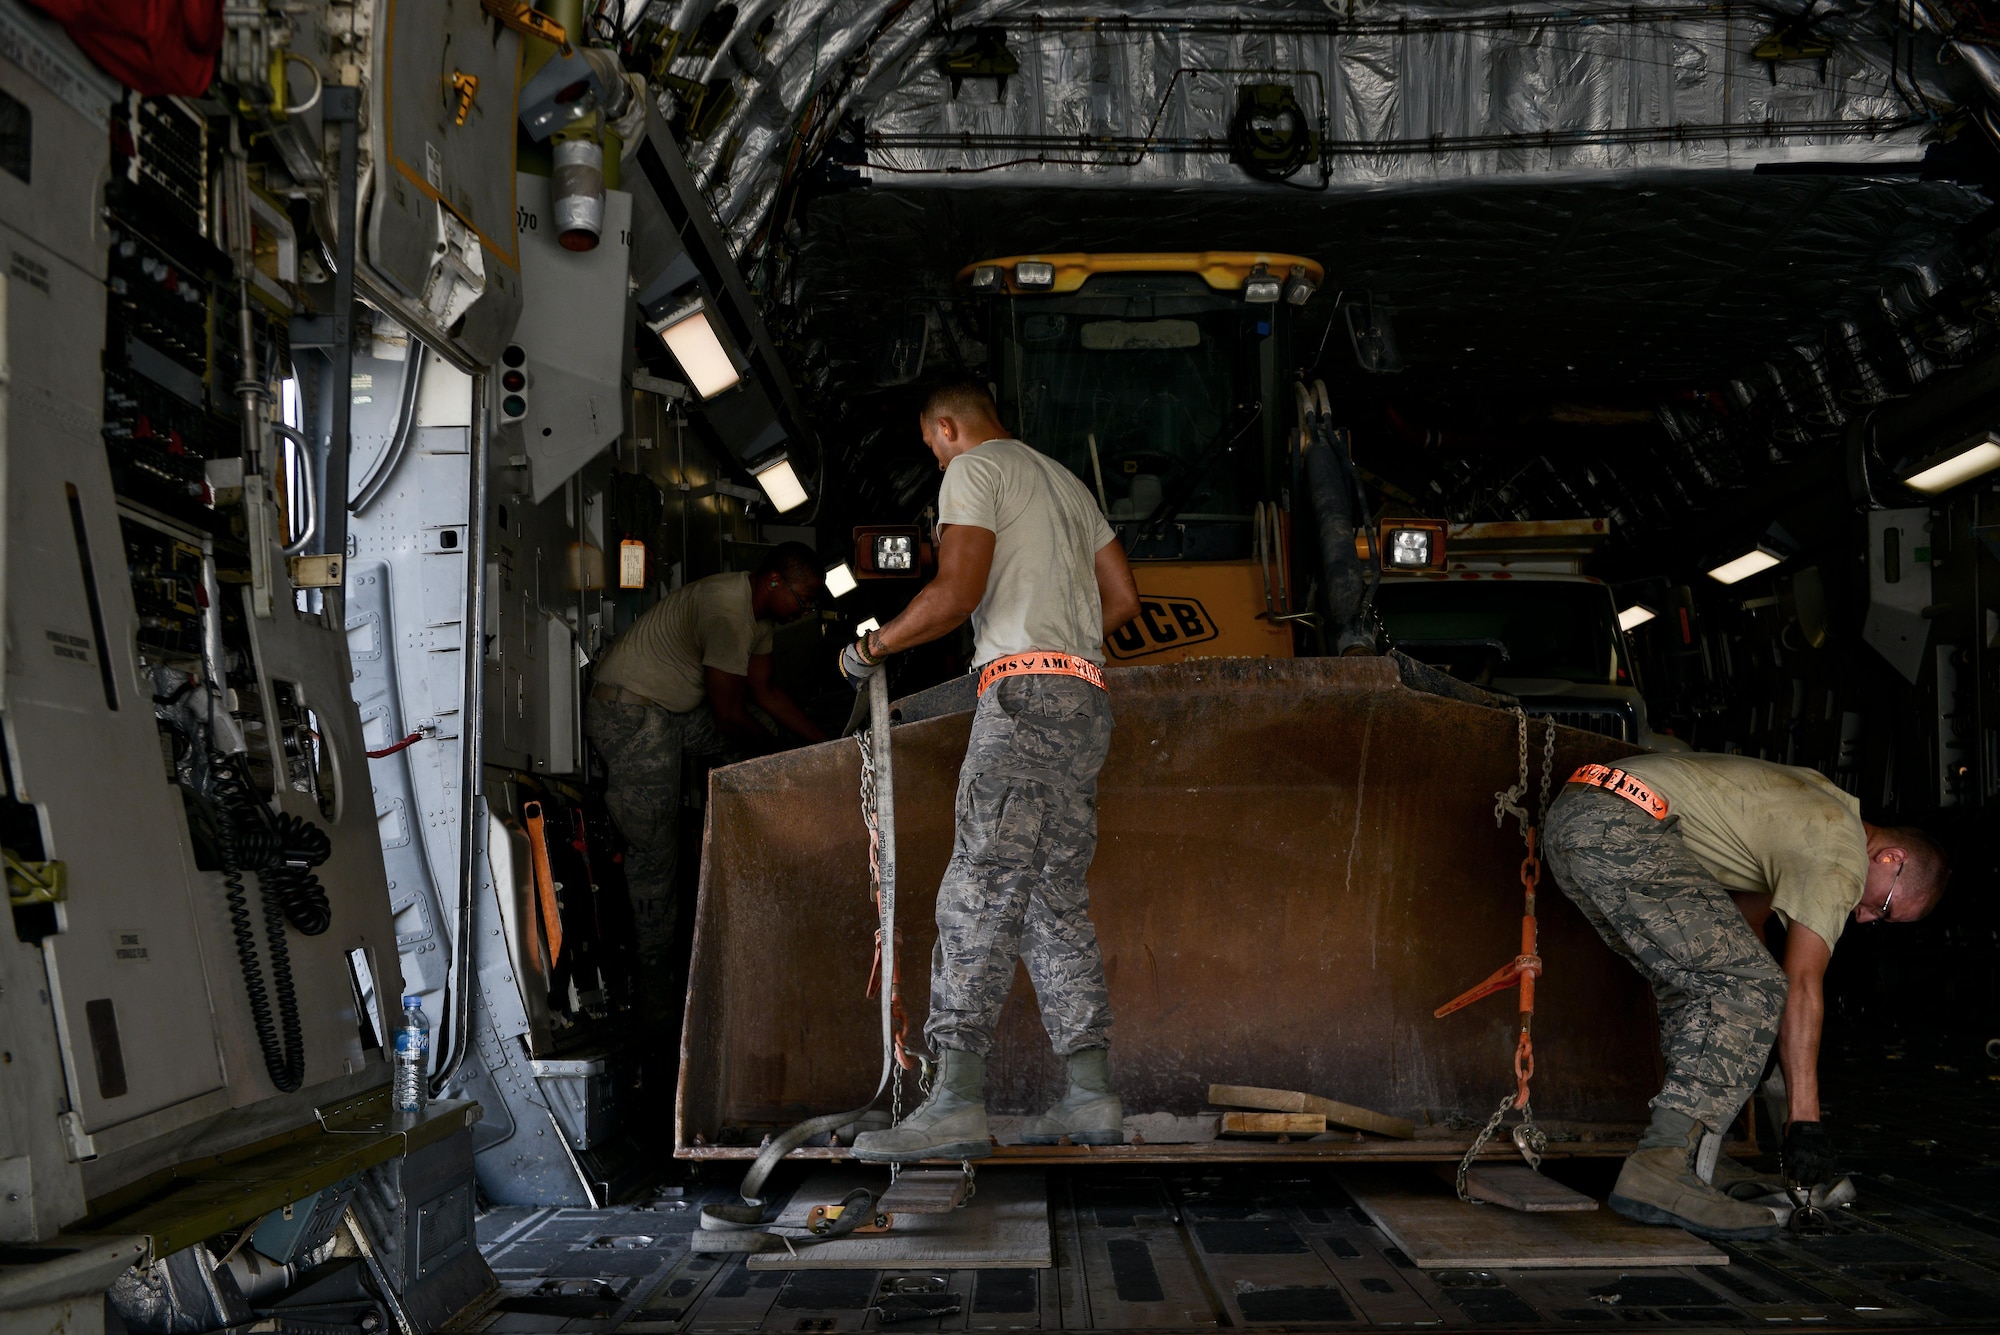 Airmen from the 8th Expeditionary Air Mobility Squadron make final checks while securing a bulldozer onto a -17 Globemaster aircraft prior to take off May 13, 2015 at Al Udeid Air Base, Qatar. Airmen from separate squadrons deployed to Al Udeid helped support a mission for forward deployed members of RED HORSE Civil Engineering to repair a runway in Southwest Asia in support of Operation Inherent Resolve. (U.S. Air Force photo/Staff Sgt. Alexandre Montes)